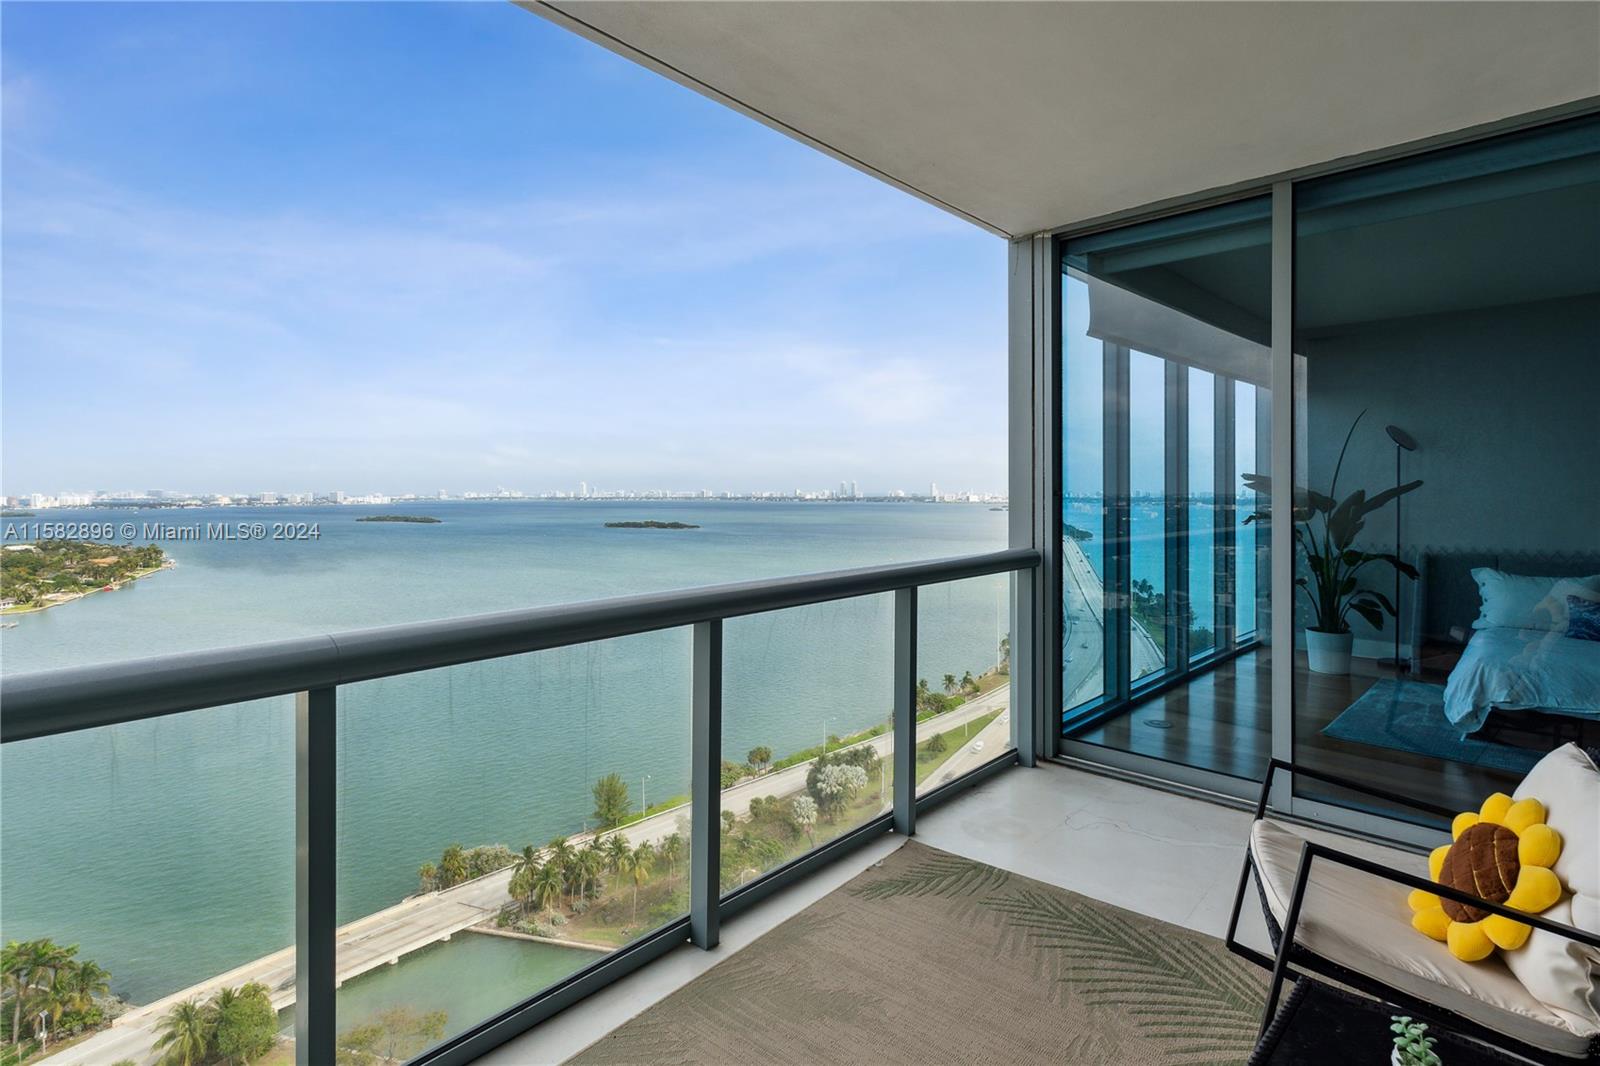 Discover luxury living in this stunning 2-bedroom, 2.5-bathroom condo boasting unrivaled views of the Miami skyline & Biscayne Bay. The expansive floor plan features 9-ft floor-to-ceiling glass windows that illuminate the modern finishes. Step into the open kitchen, equipped with stainless steel appliances. Take advantage of the walk-in closet & large balcony, offering breathtaking & unobstructed waterfront views. Resort Style amenities include a gym, 2 pools, hot tubs, theater, sauna, game room, business center, bbq area, & more. The location is minutes from the Design District, & provides easy access to the vibrant downtown, Brickell, & airport and the iconic Miami Beach is just moments away. Comes with 1 assigned parking space + 1 valet & storage unit.